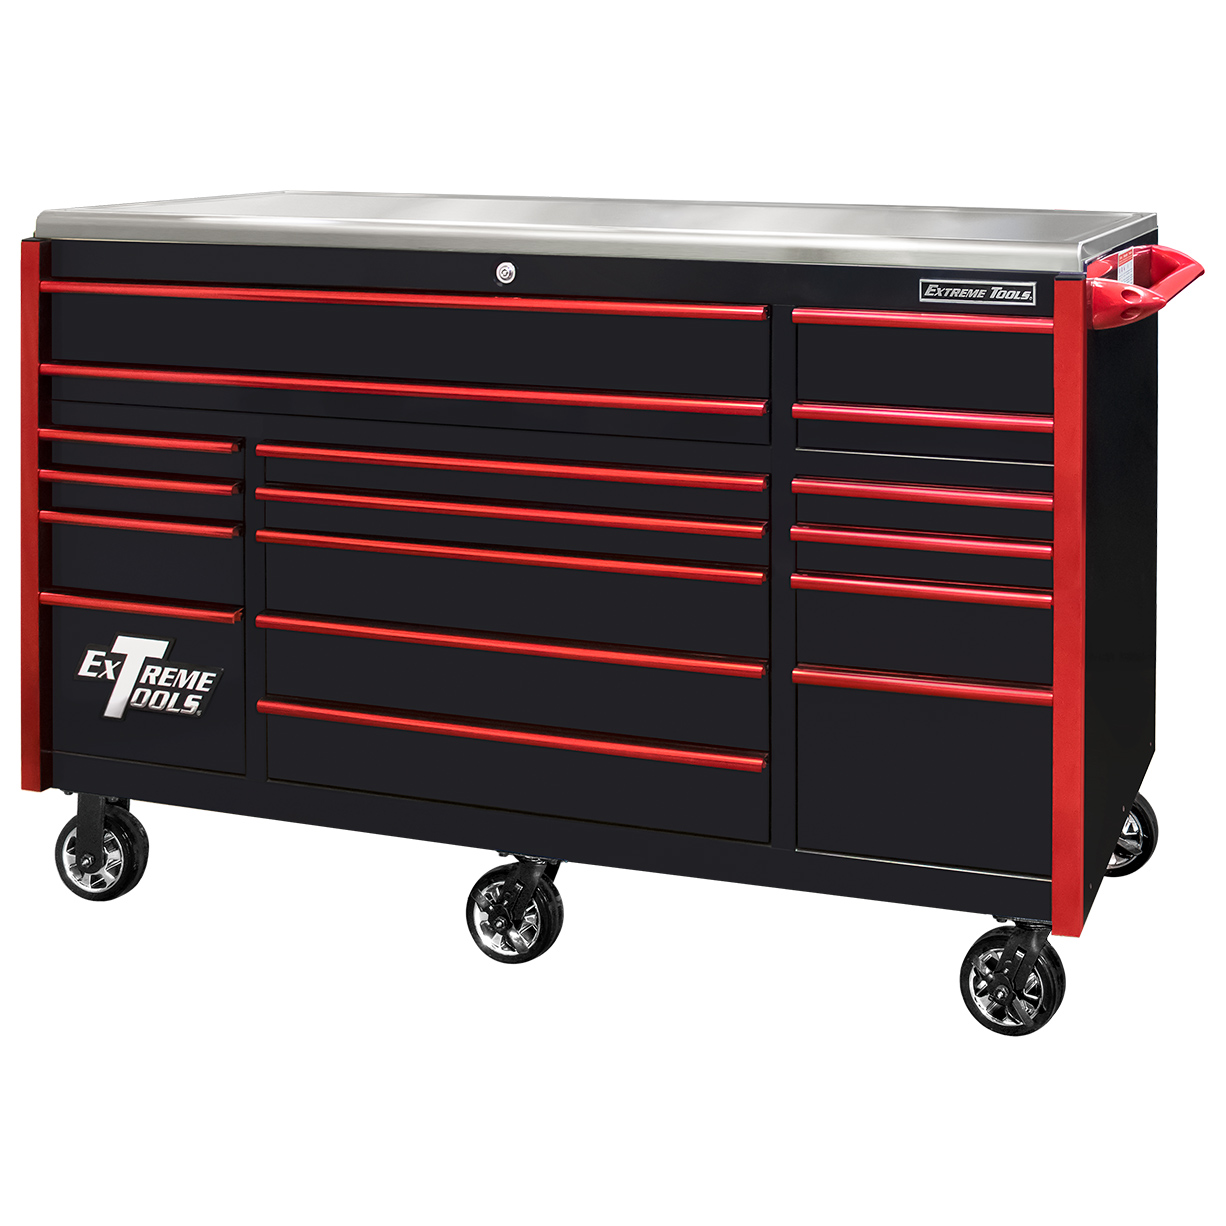 https://rockintoolboxes.com/wp-content/uploads/2021/01/EX7217RCQBKRD-Closed-Extreme-Tools-EX-Professional-Series-72-x-30-inch-Roller-Cabinet-with-300-600-lbs-Drawer-Slides-RockinToolBoxes.jpg